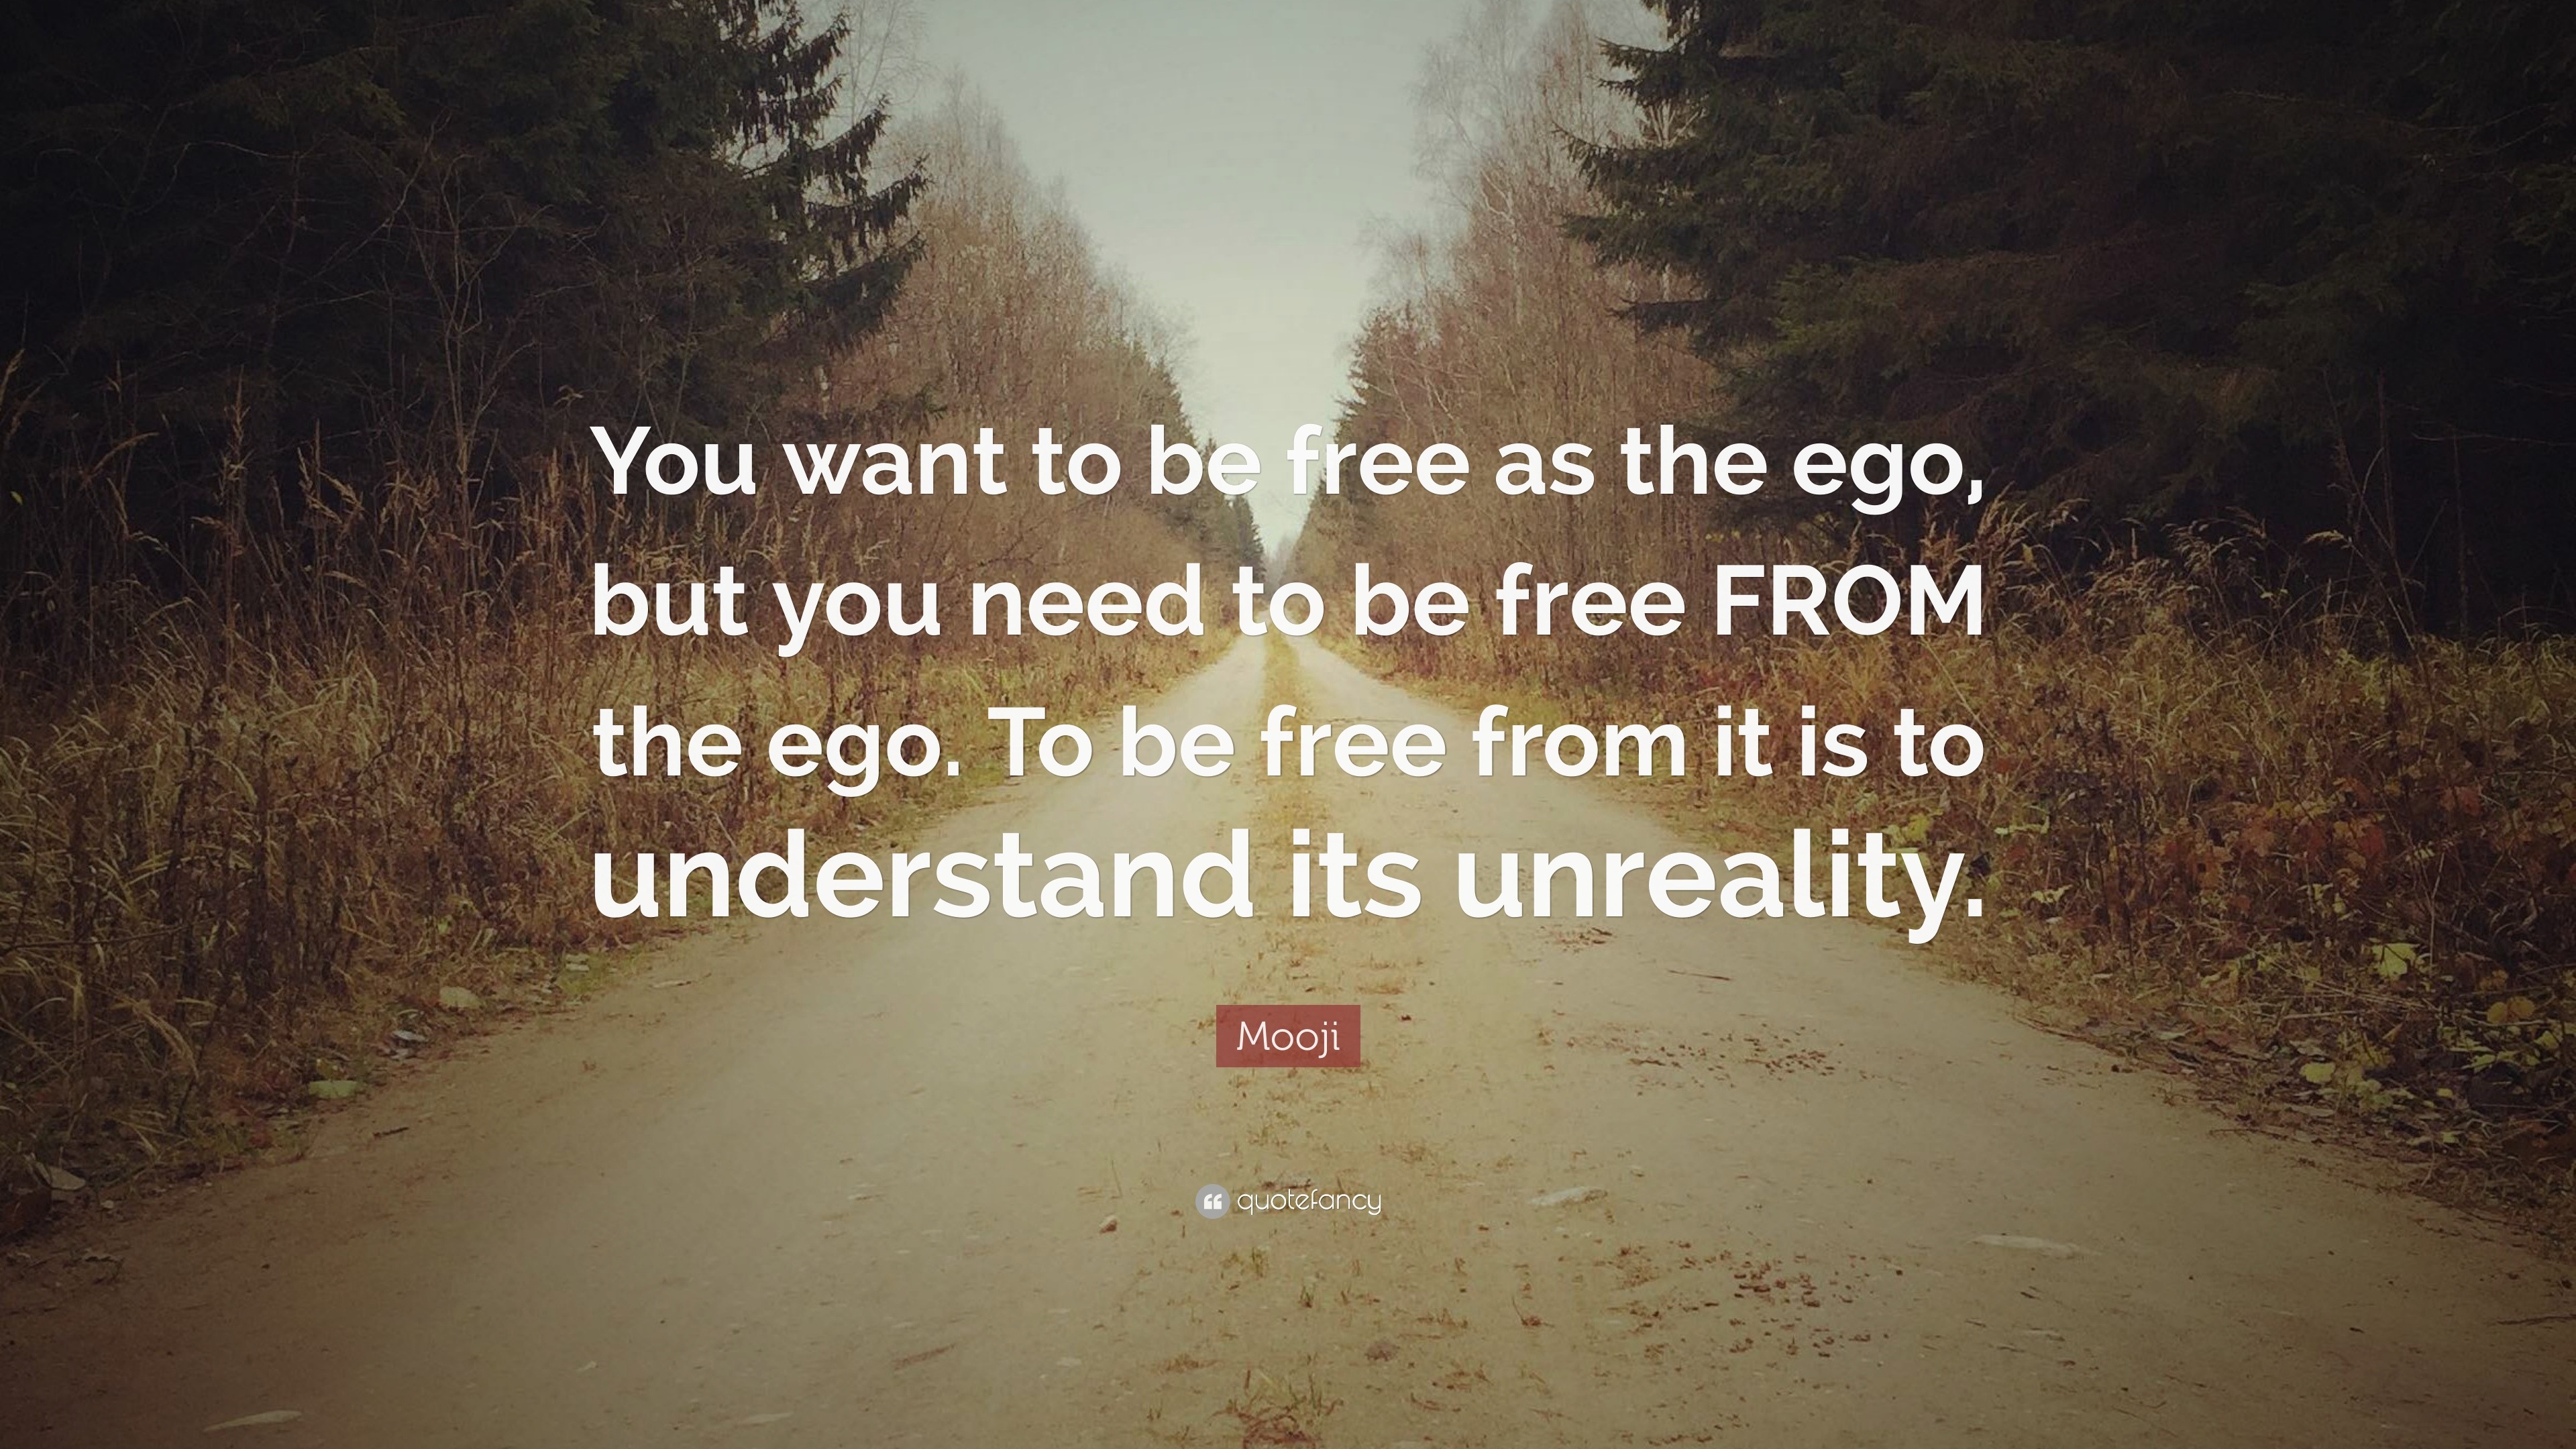 Mooji Quote: “You want to be free as the ego, but you need to be free ...